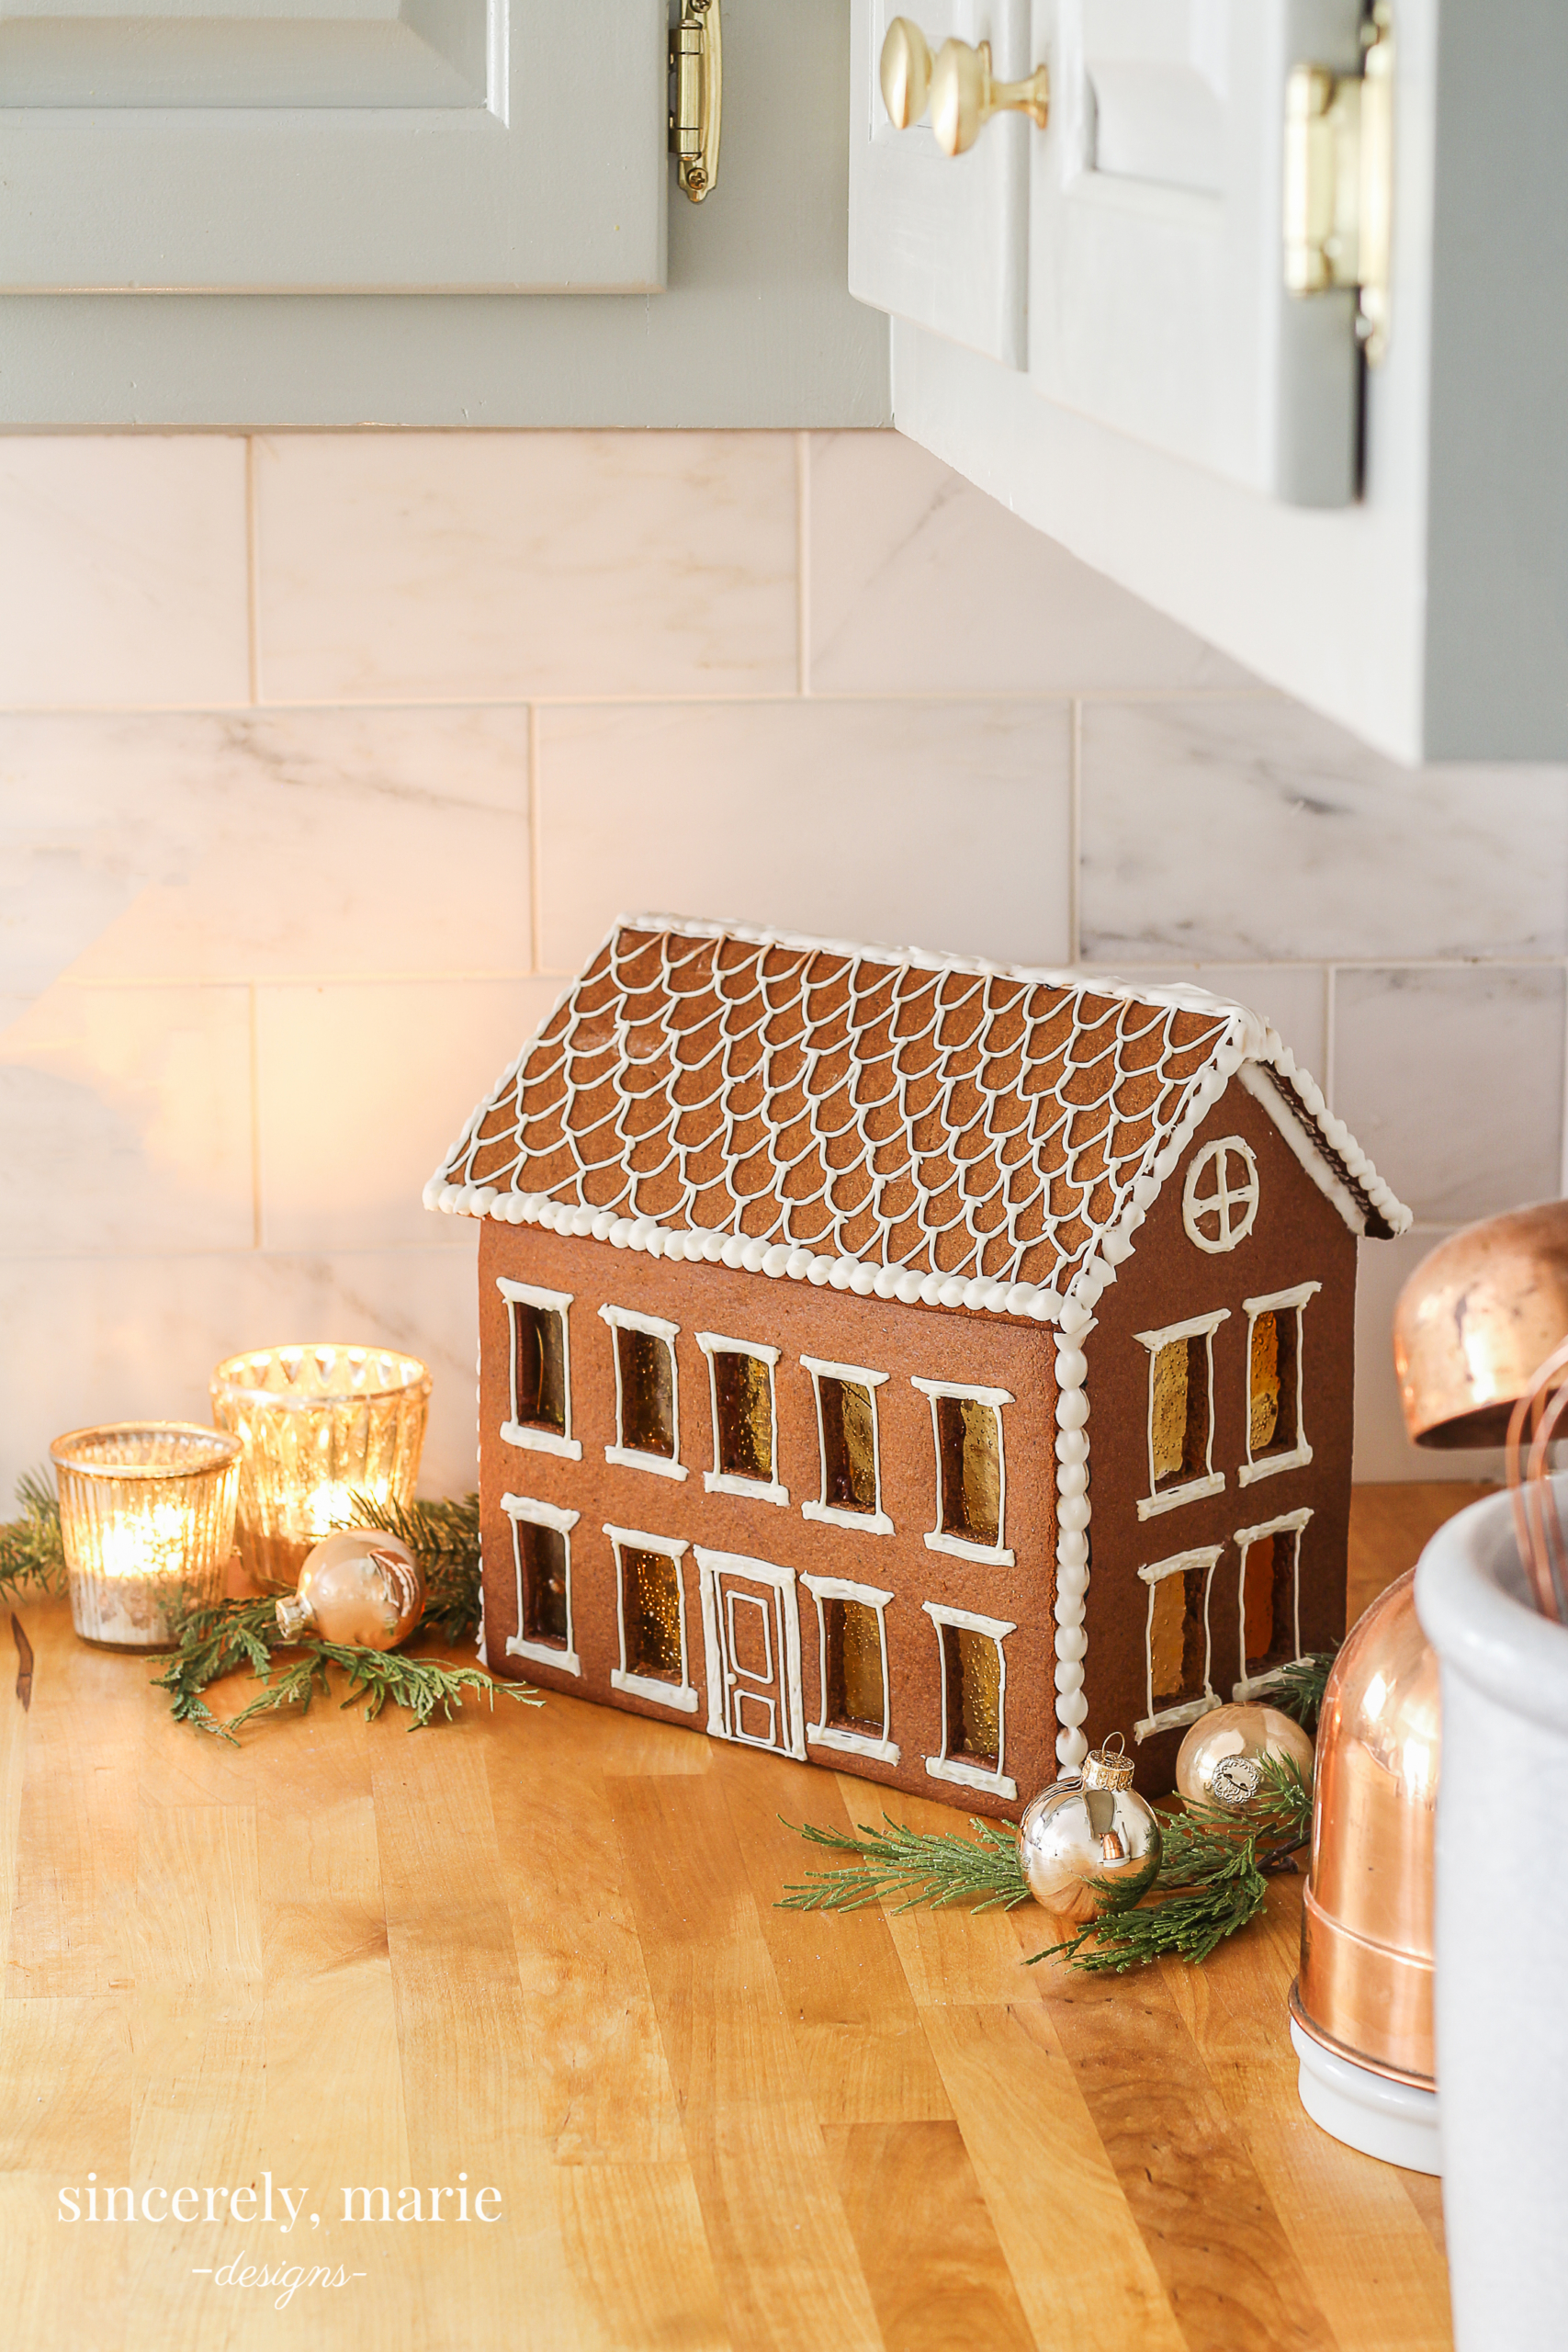 https://sincerelymariedesigns.com/wp-content/uploads/2018/12/Homemade-Colonial-Gingerbread-House-1-21-scaled.jpg